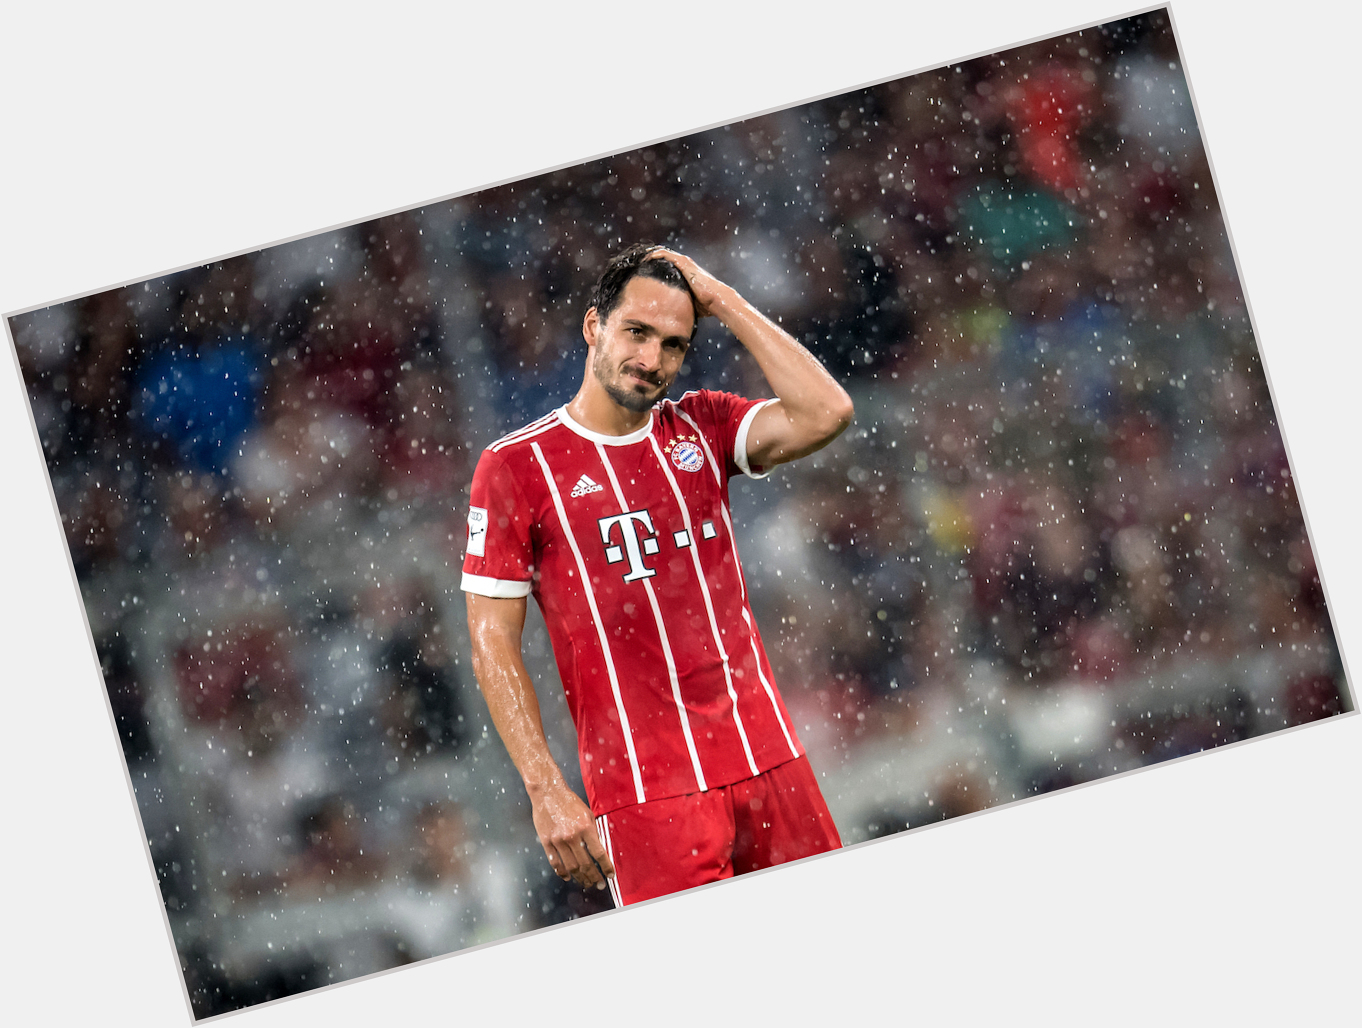 Happy Birthday to Mats Hummels  522 Appearances 46 Goals  27 Assists

What a player  